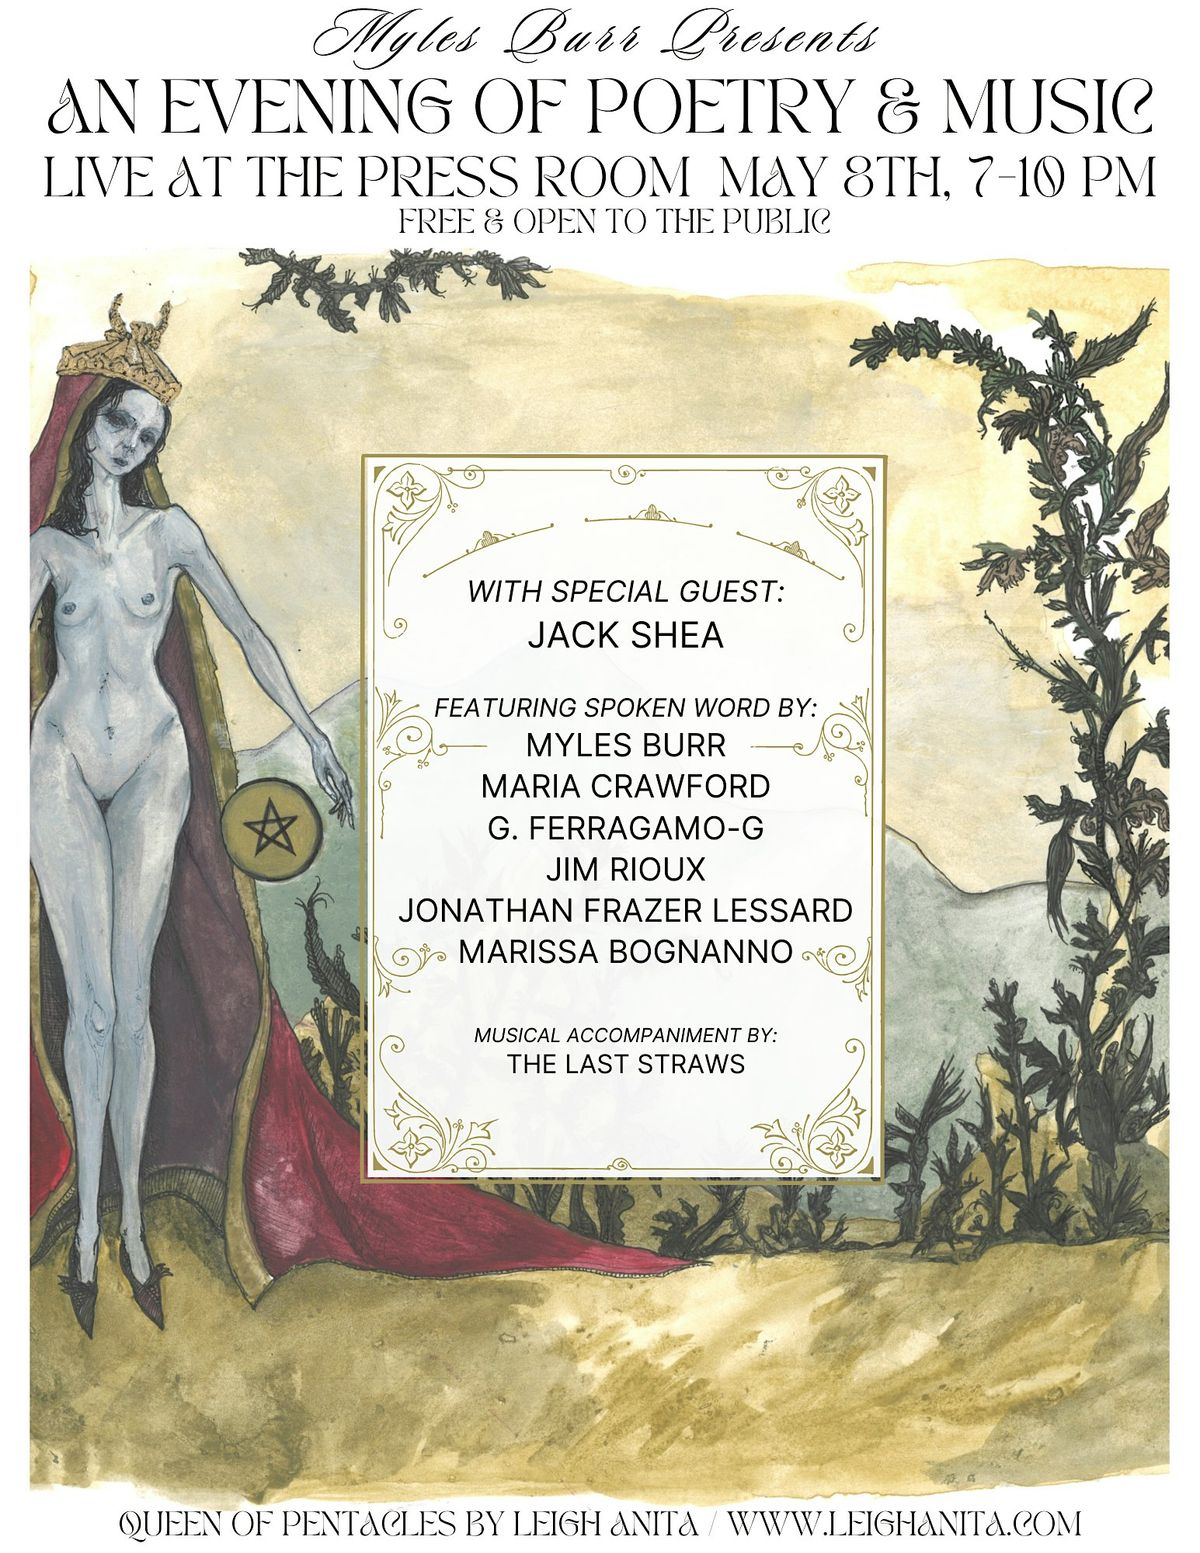 Myles Burr Presents: An Evening of Poetry & Music